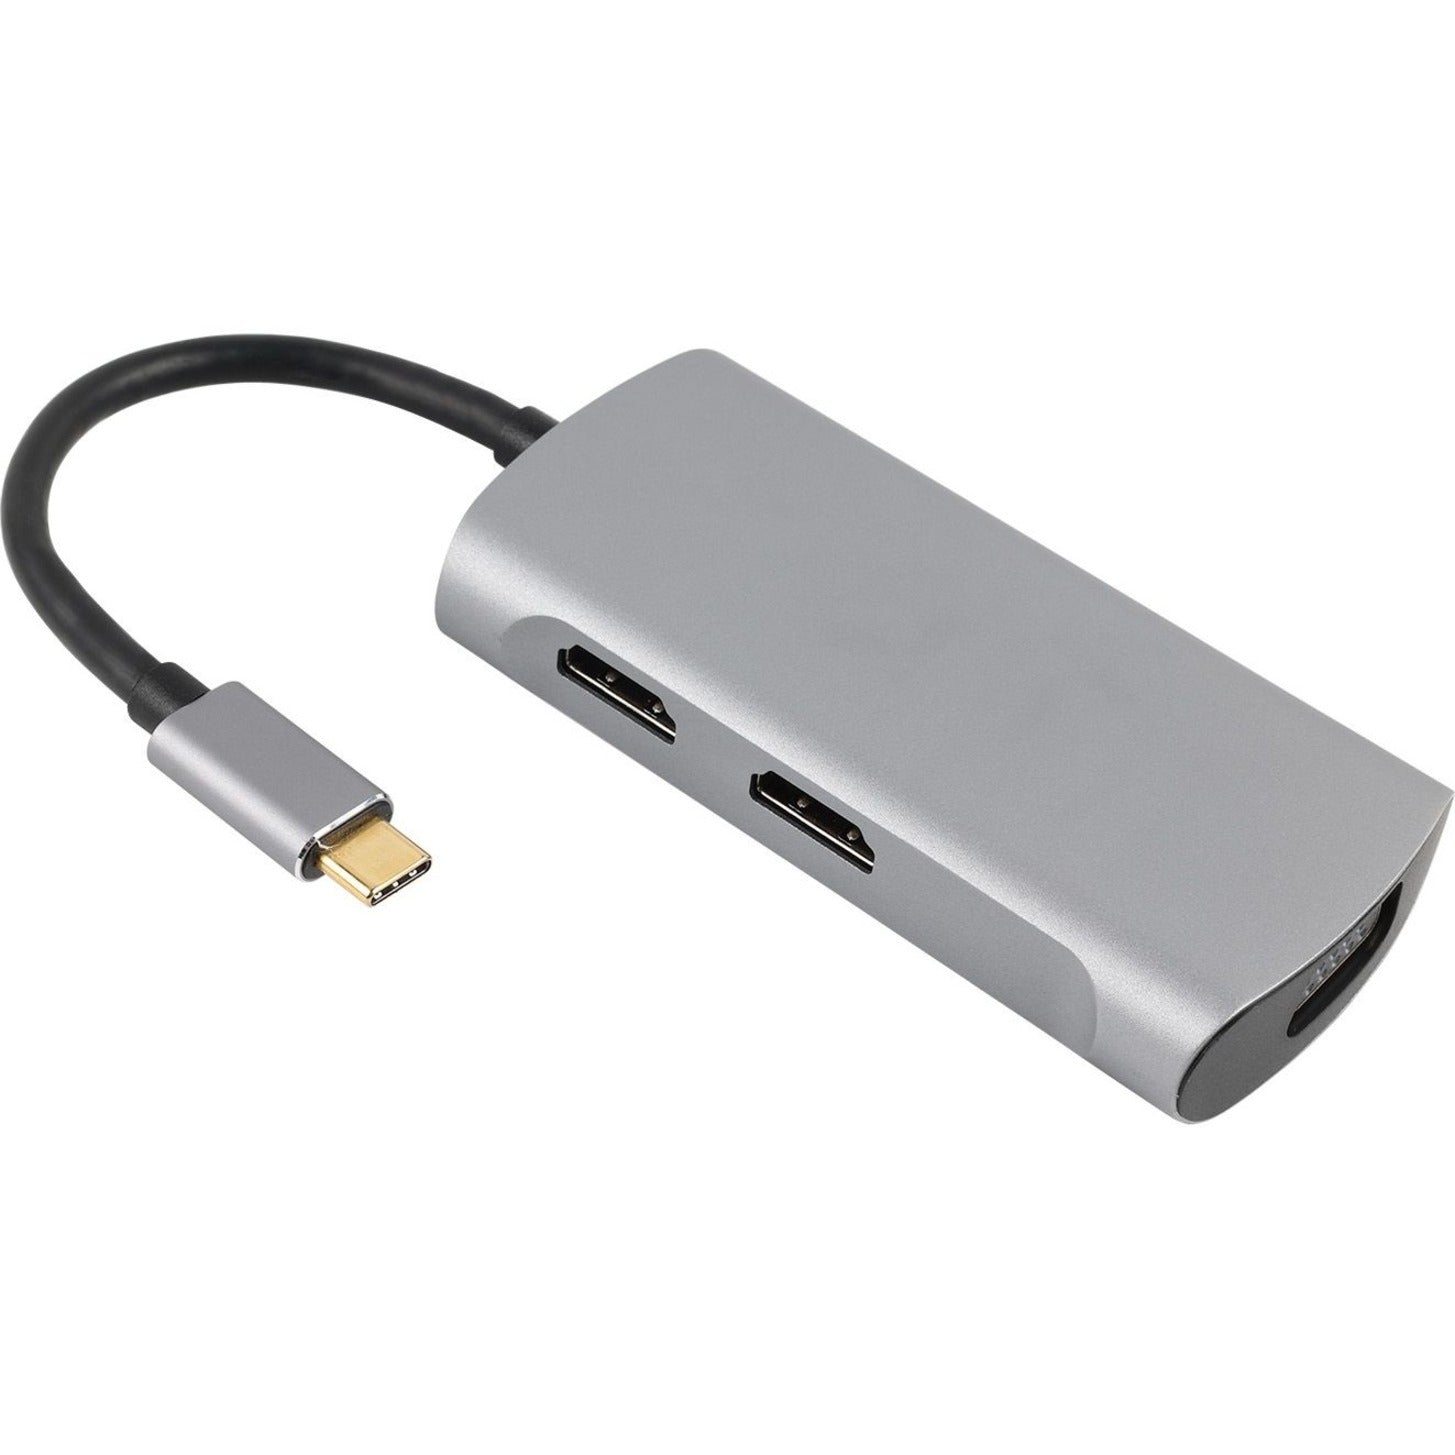 4XEM 4XMST13 3-Port USB-C to HDMI and VGA Multi-Monitor Hub, 4K Resolution, USB Power Delivery